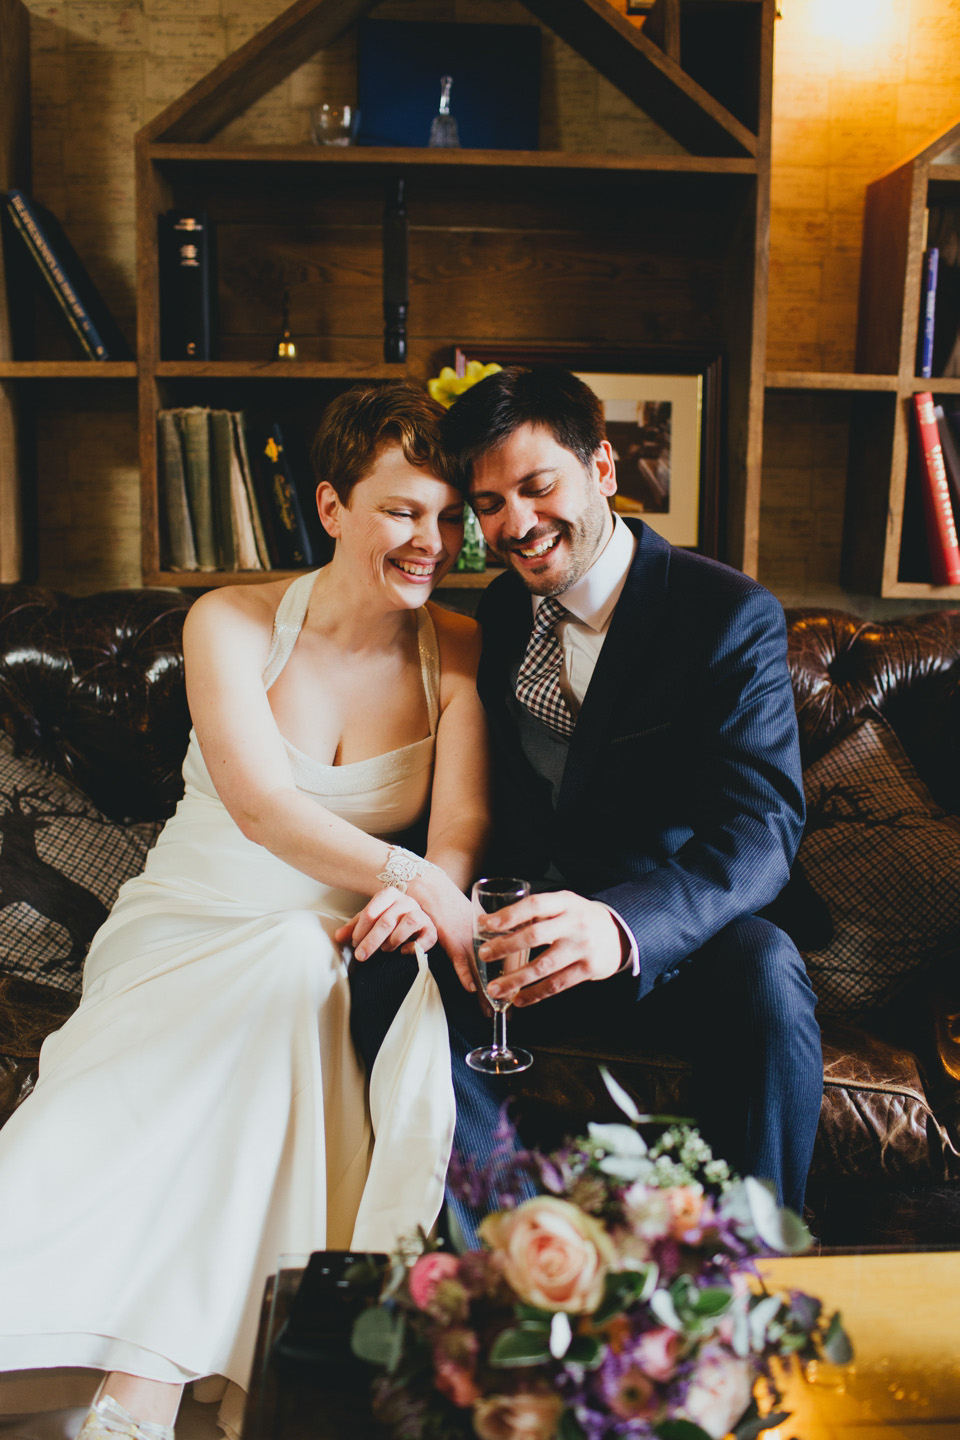 A Nicole Miller Dress and First Look for an Informal Pub Wedding